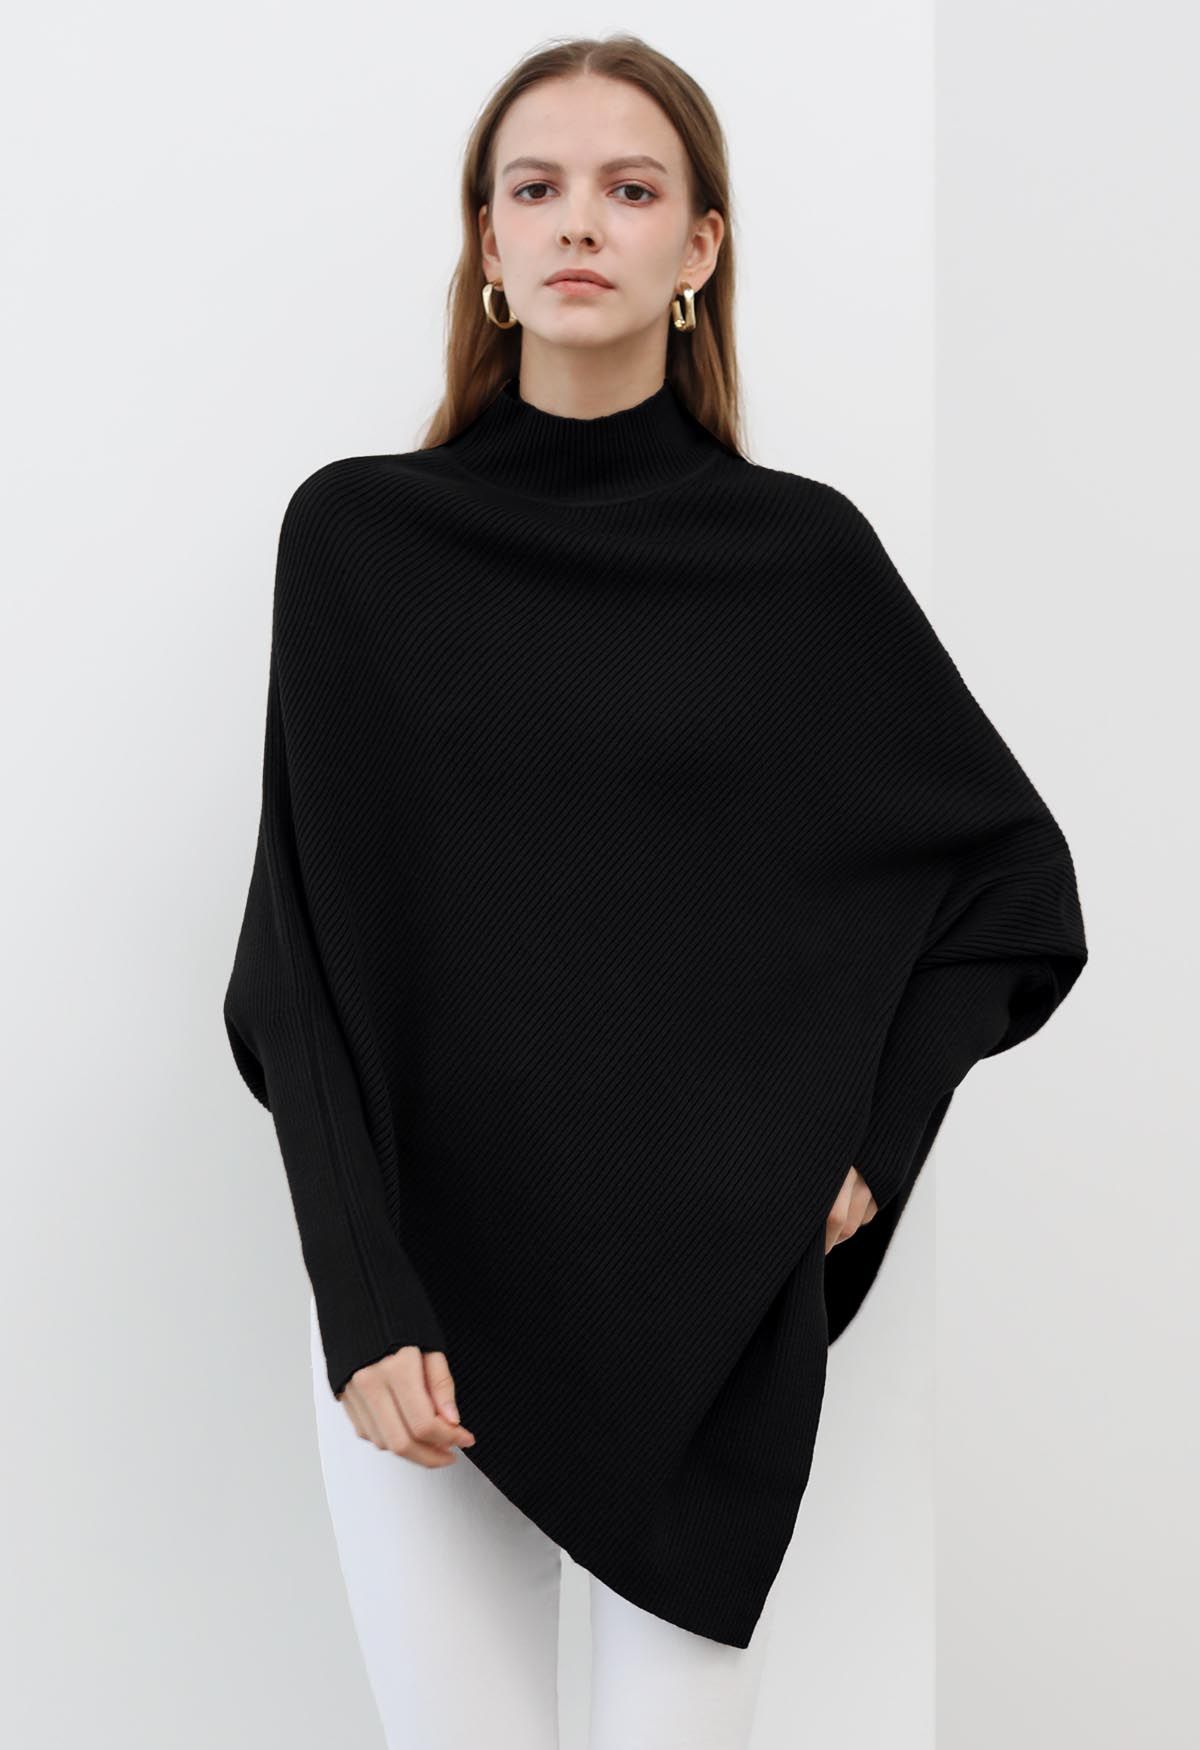 Asymmetric Batwing Sleeve Ribbed Knit Poncho in Black - Retro, Indie and  Unique Fashion